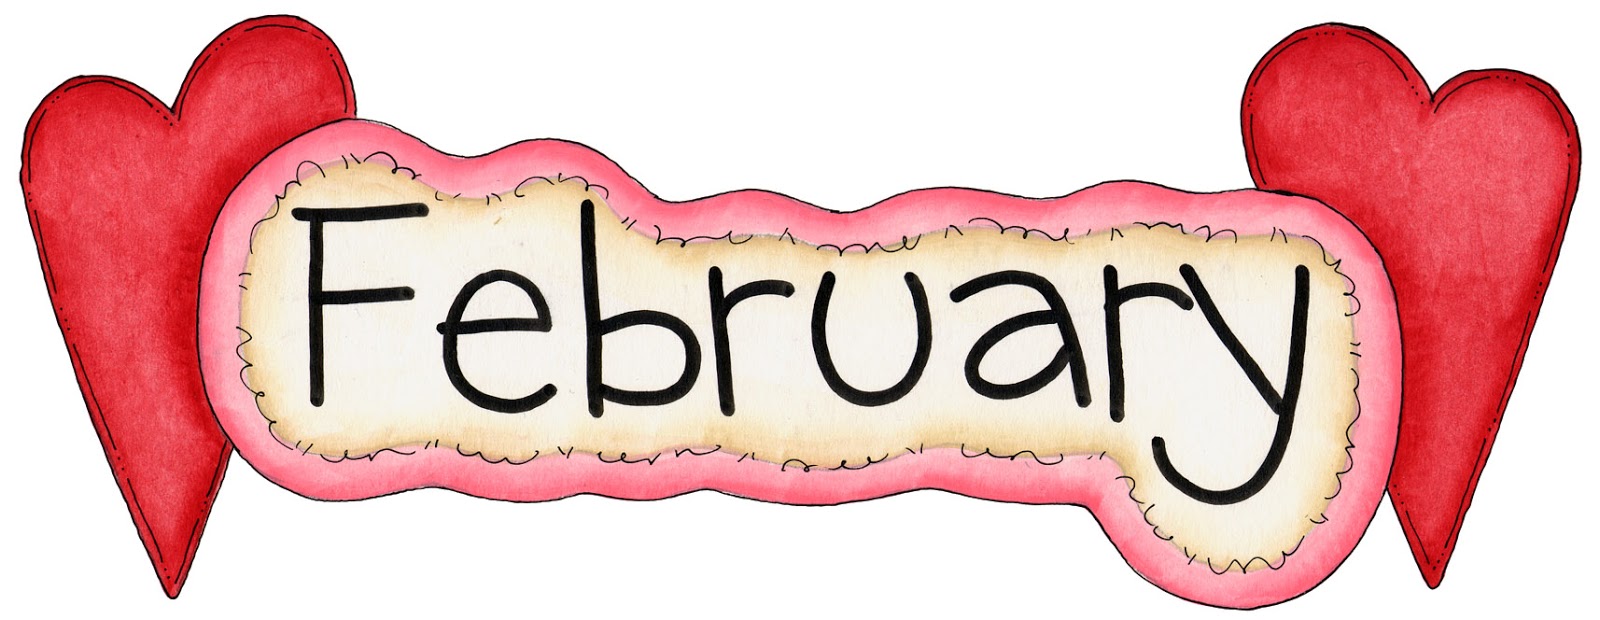 February clip art images illustrations photos